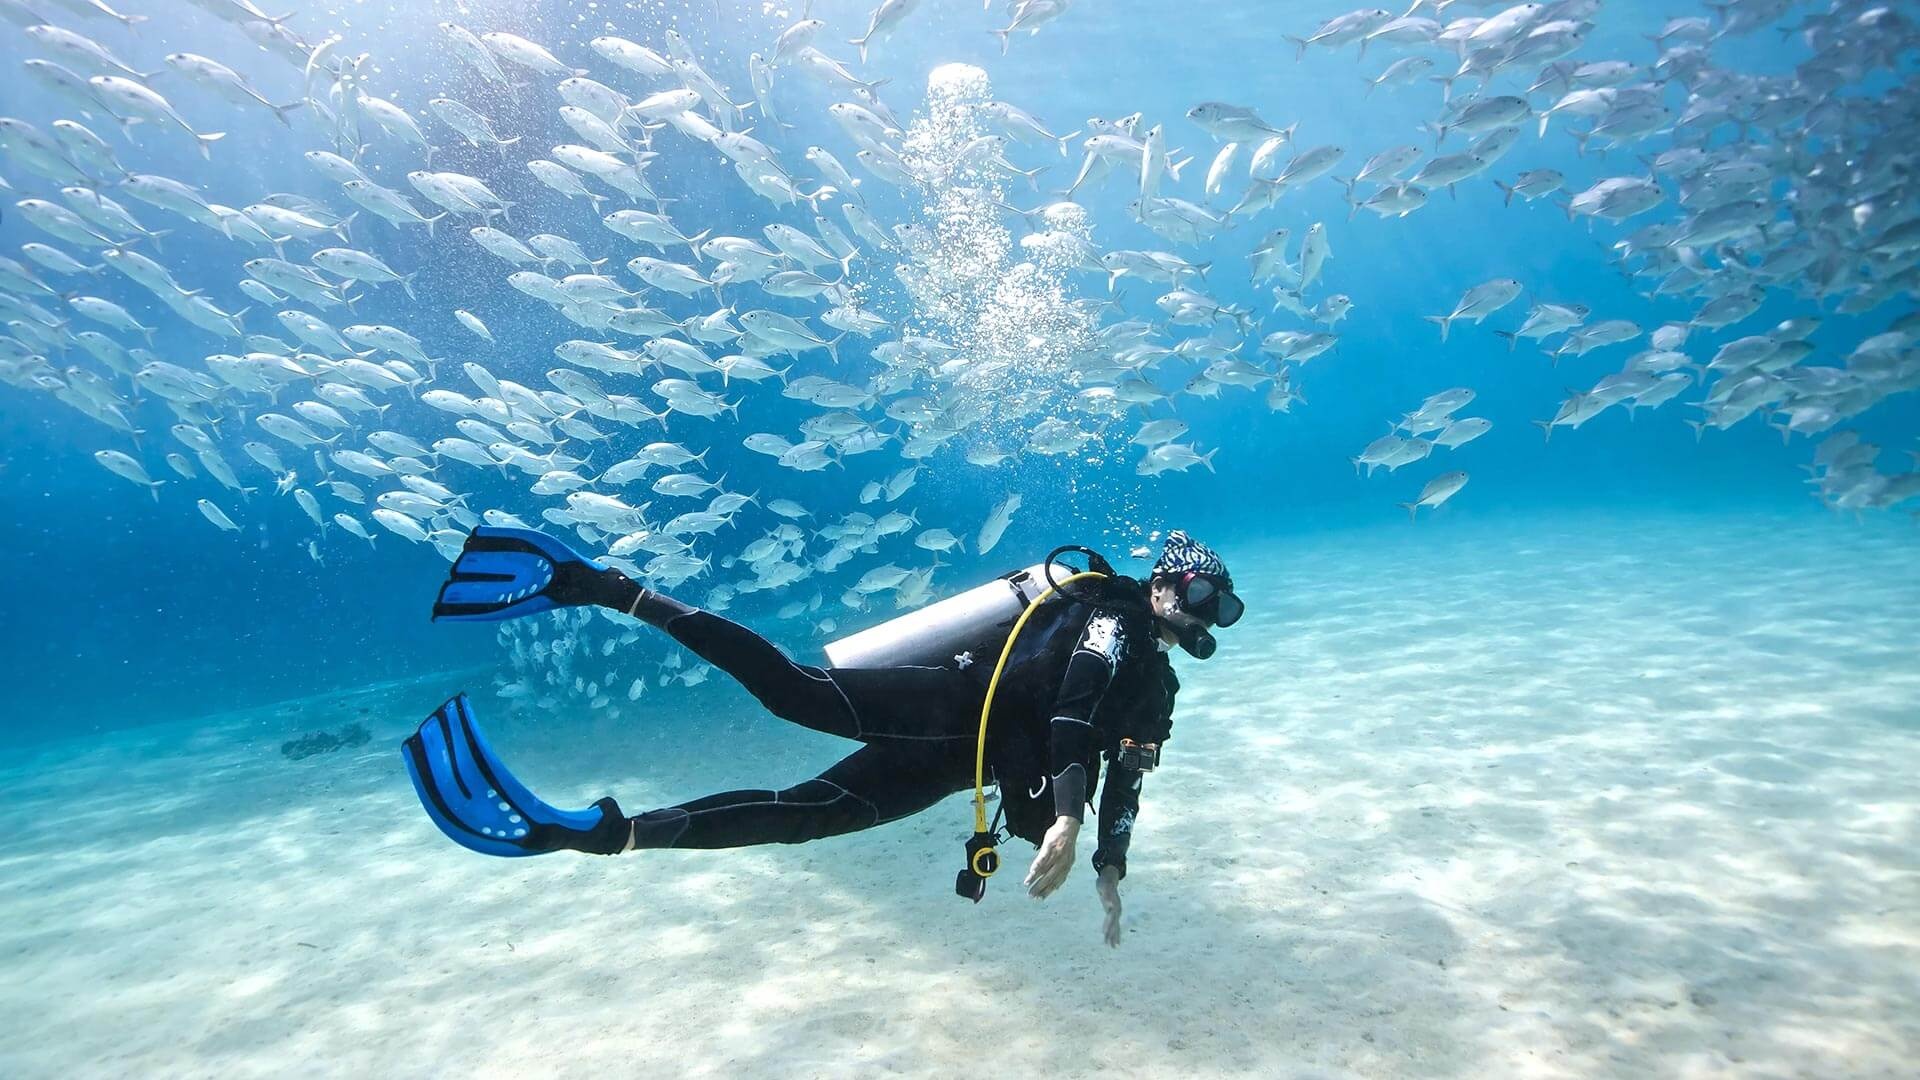 Diving: Recreational underwater activity, An extreme sport with an opportunity to explore schools of fish. 1920x1080 Full HD Background.